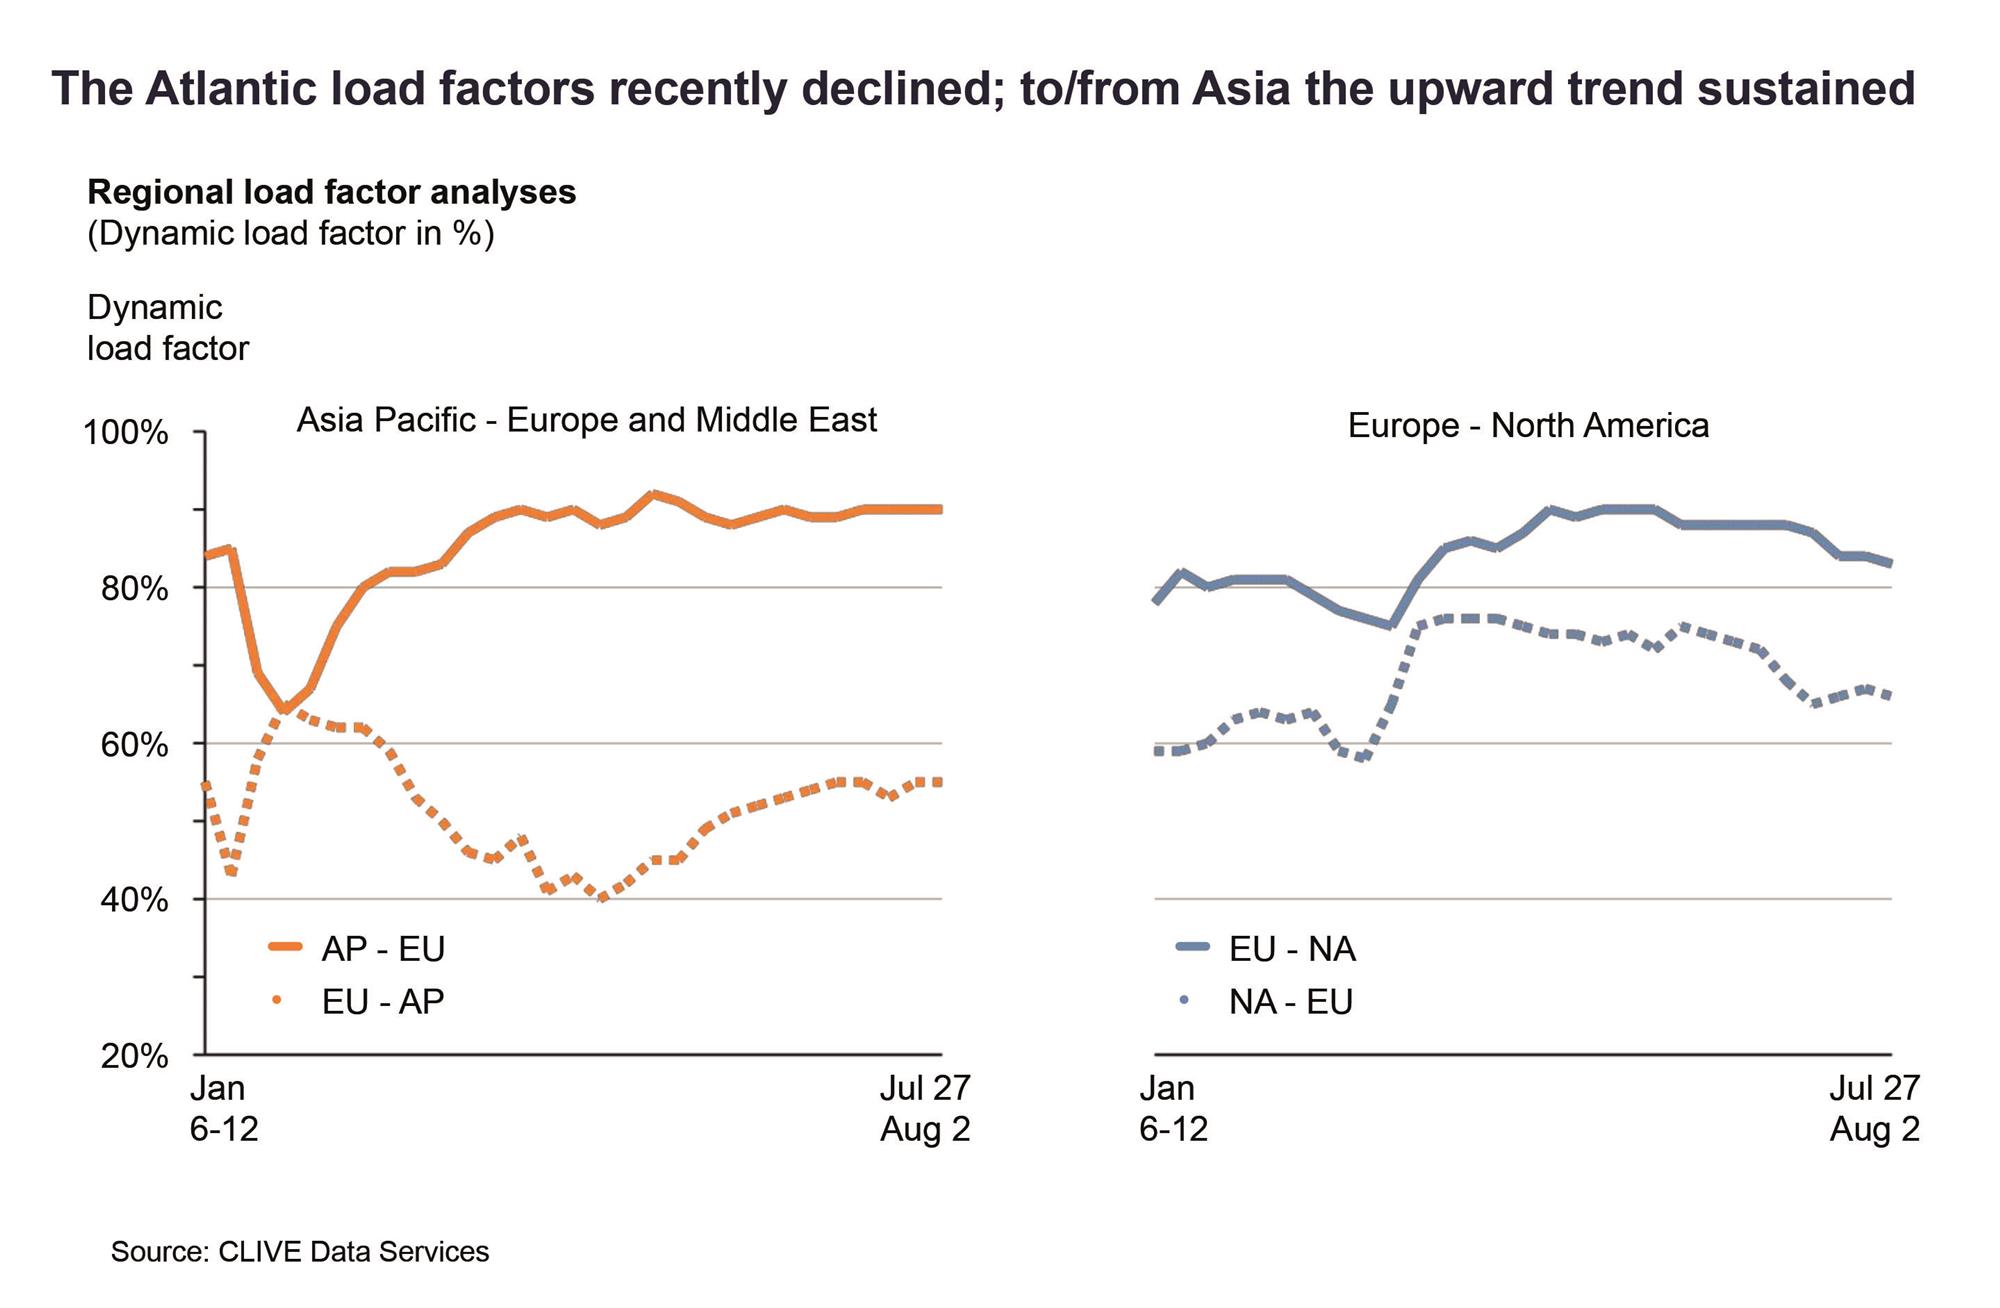 Self Photos / Files - Atlantic load factors declined in July but the to and from Asia upward trend continued